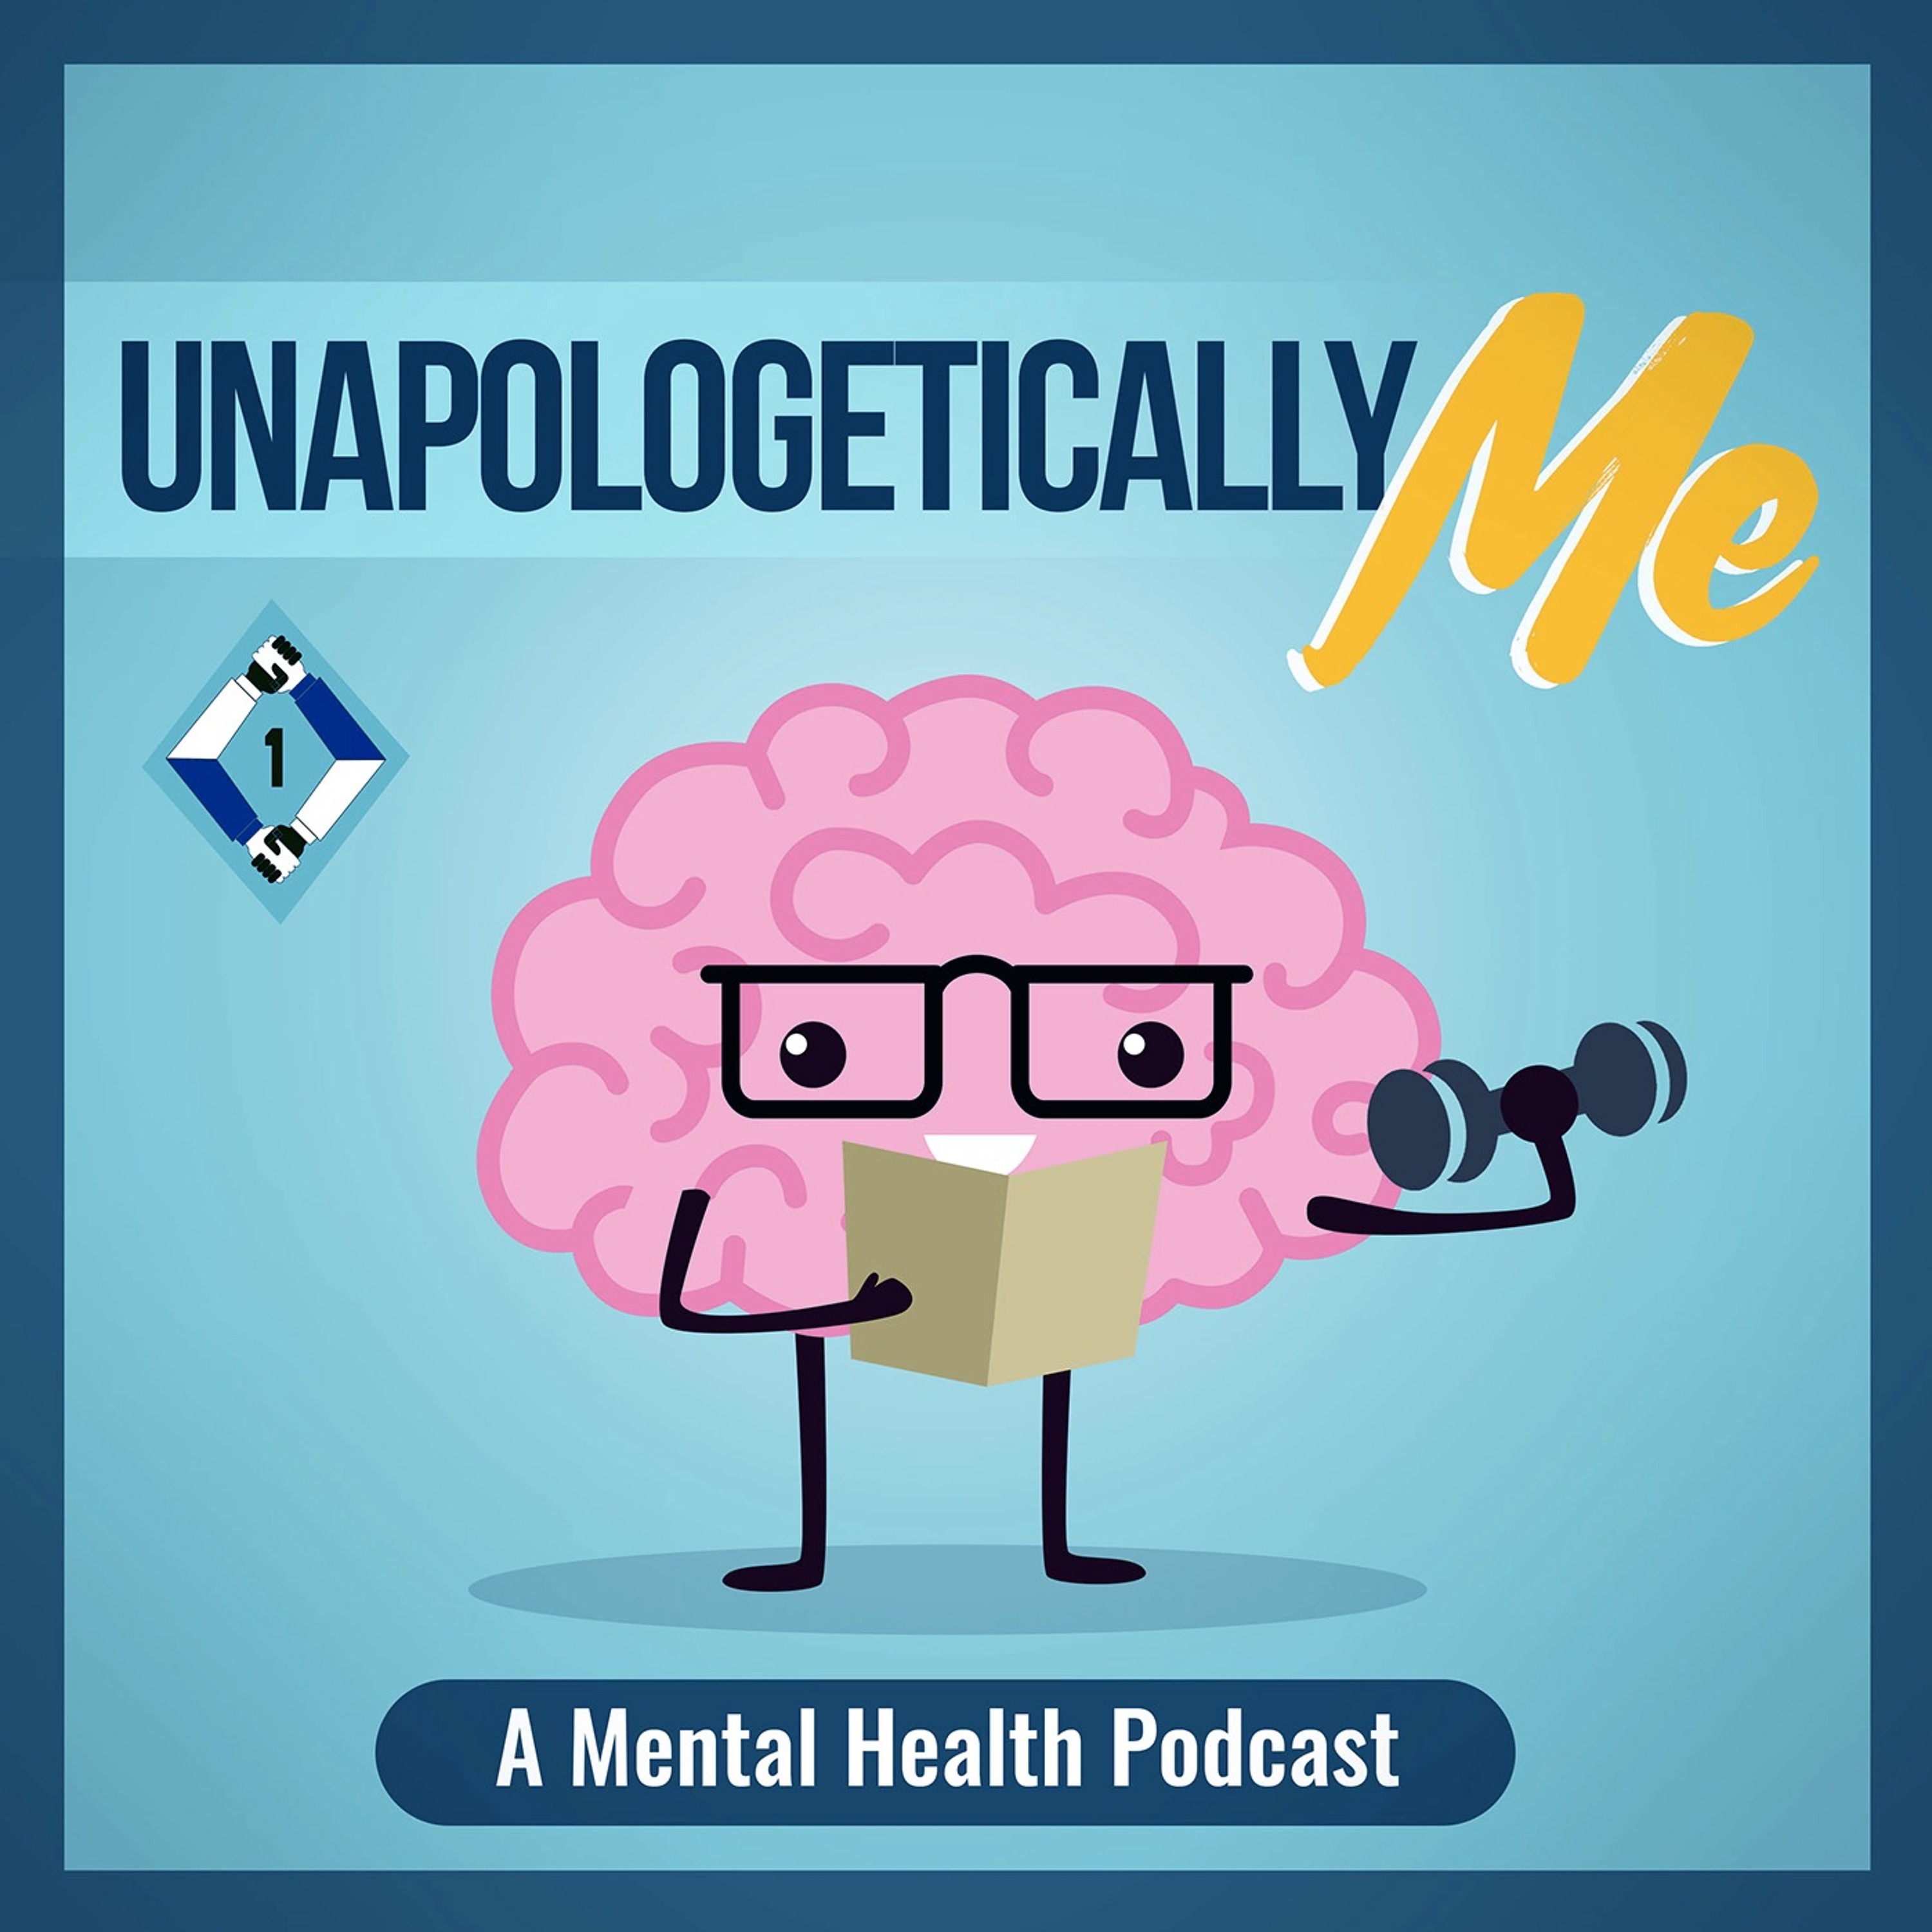 Unapologetically Me: A Mental Health Podcast - PEAR CARDS